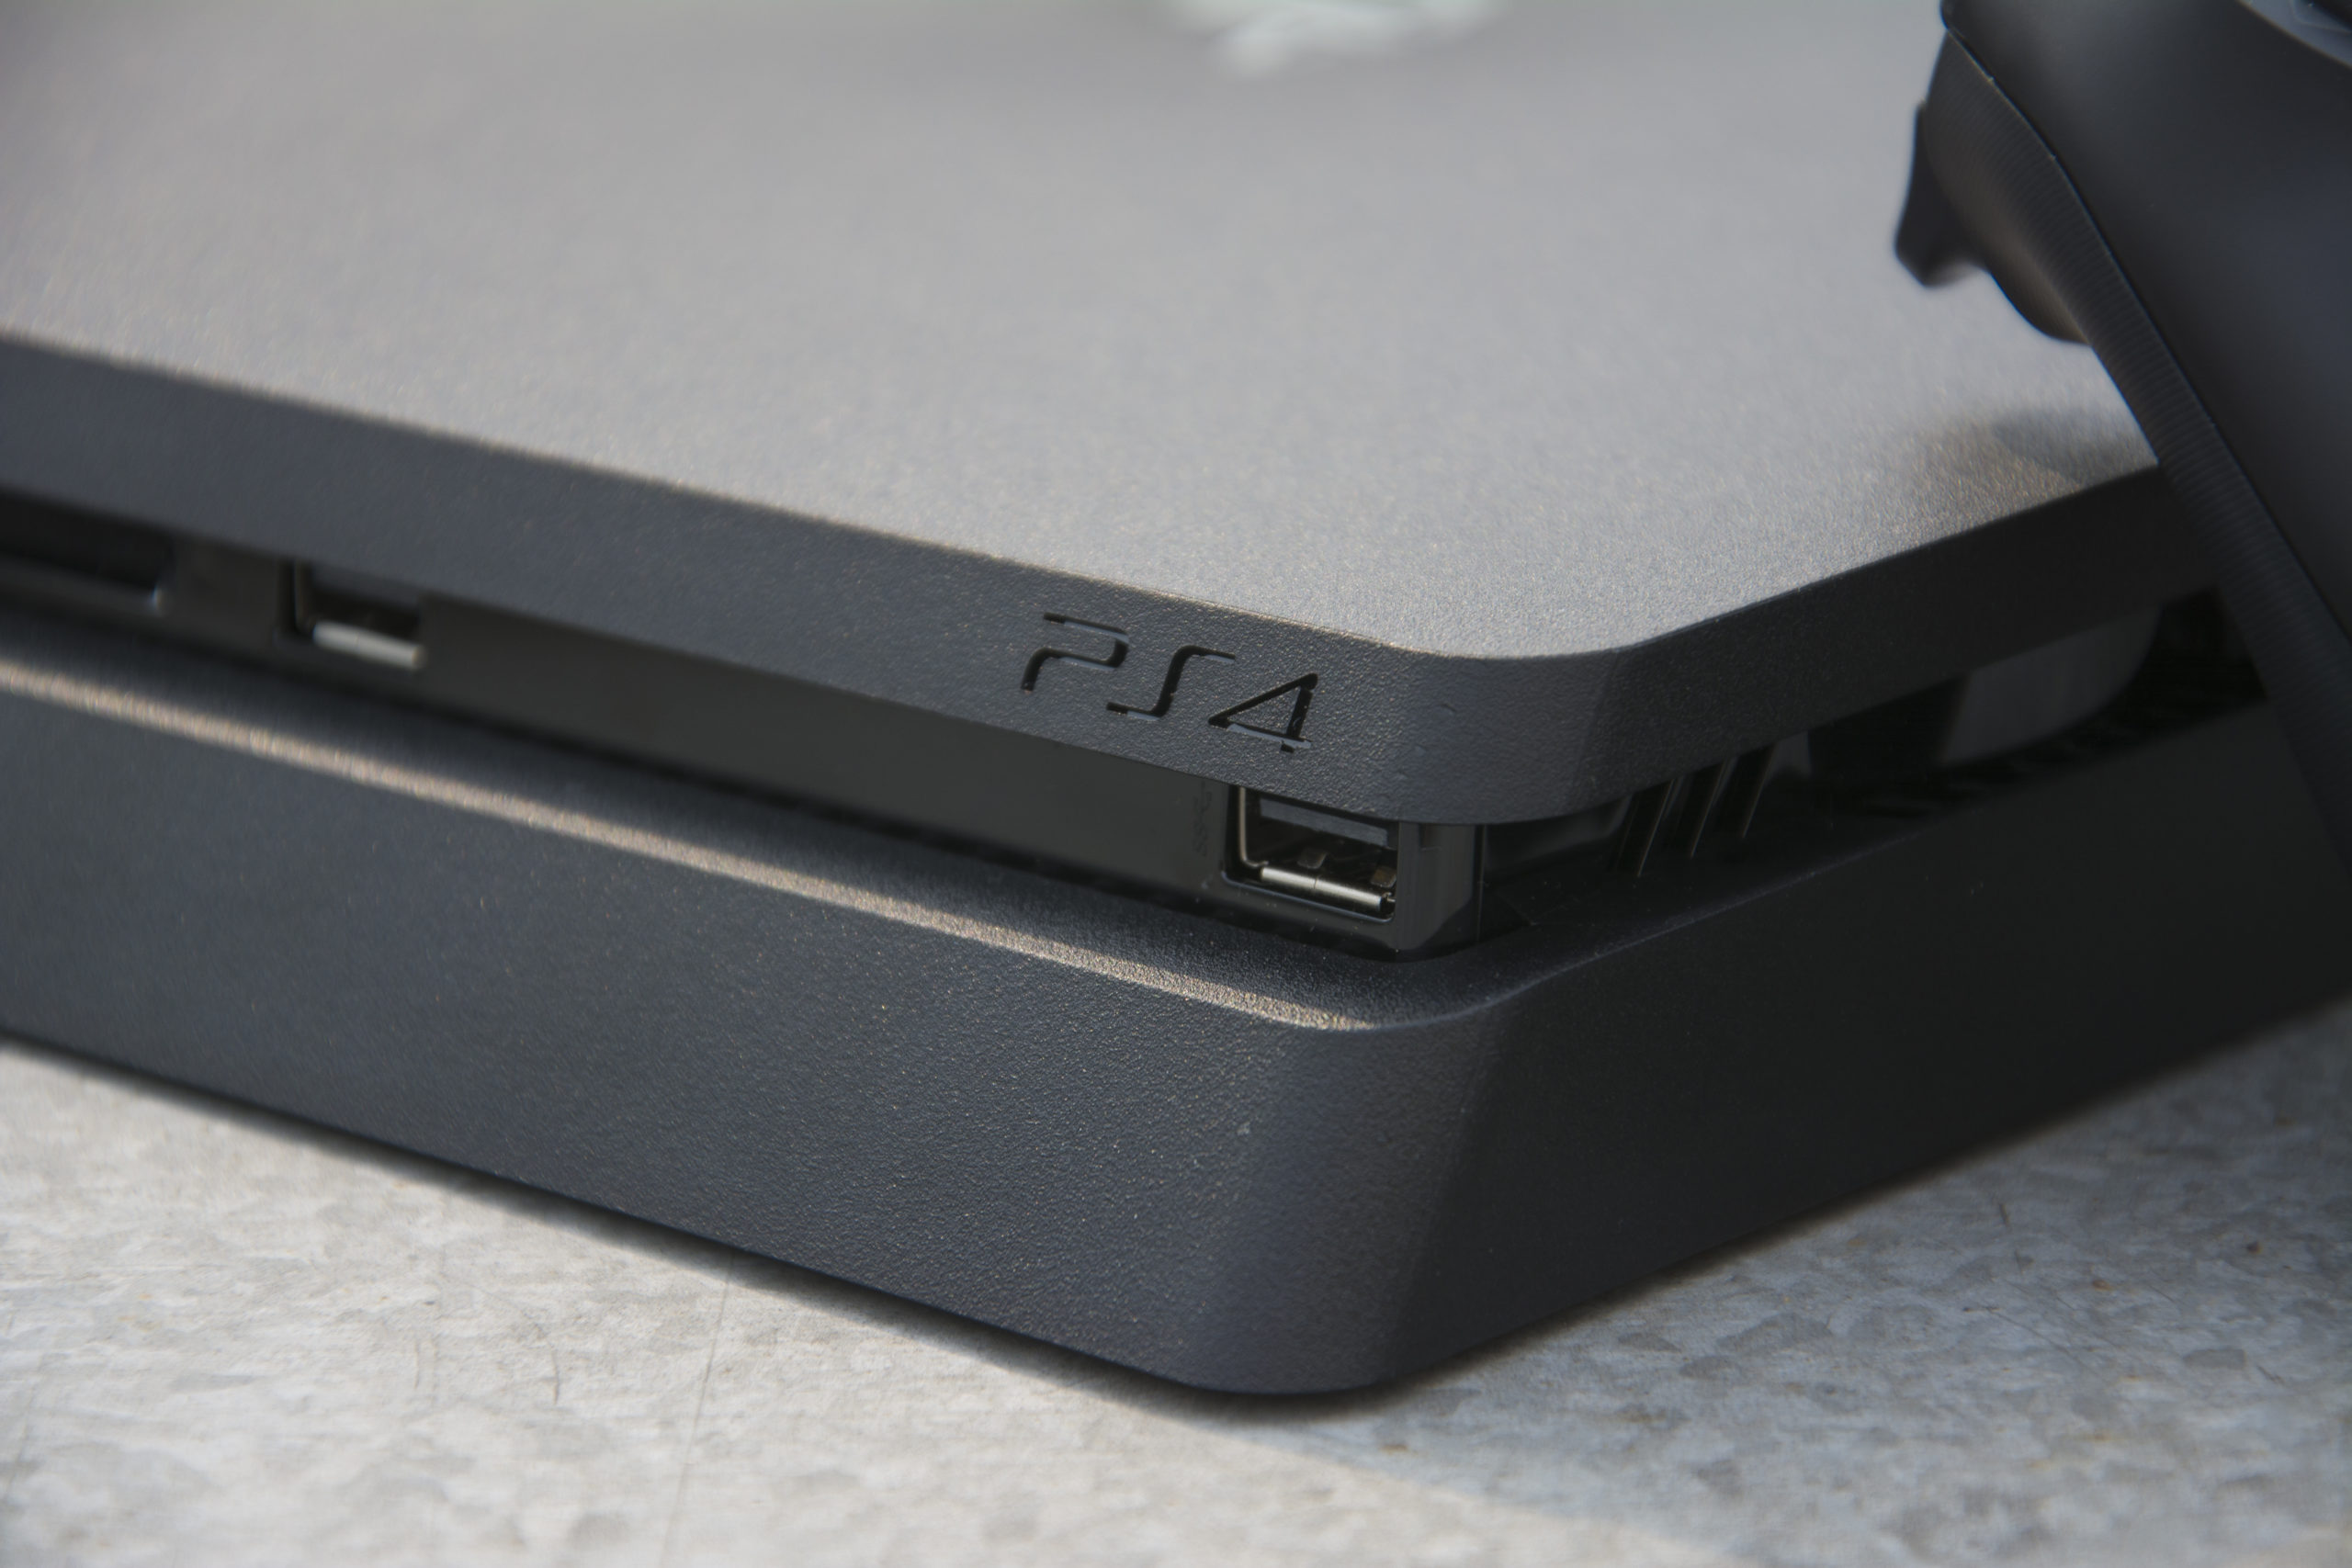 PS4 Slim review Compact, beautiful and exactly what you’d expect